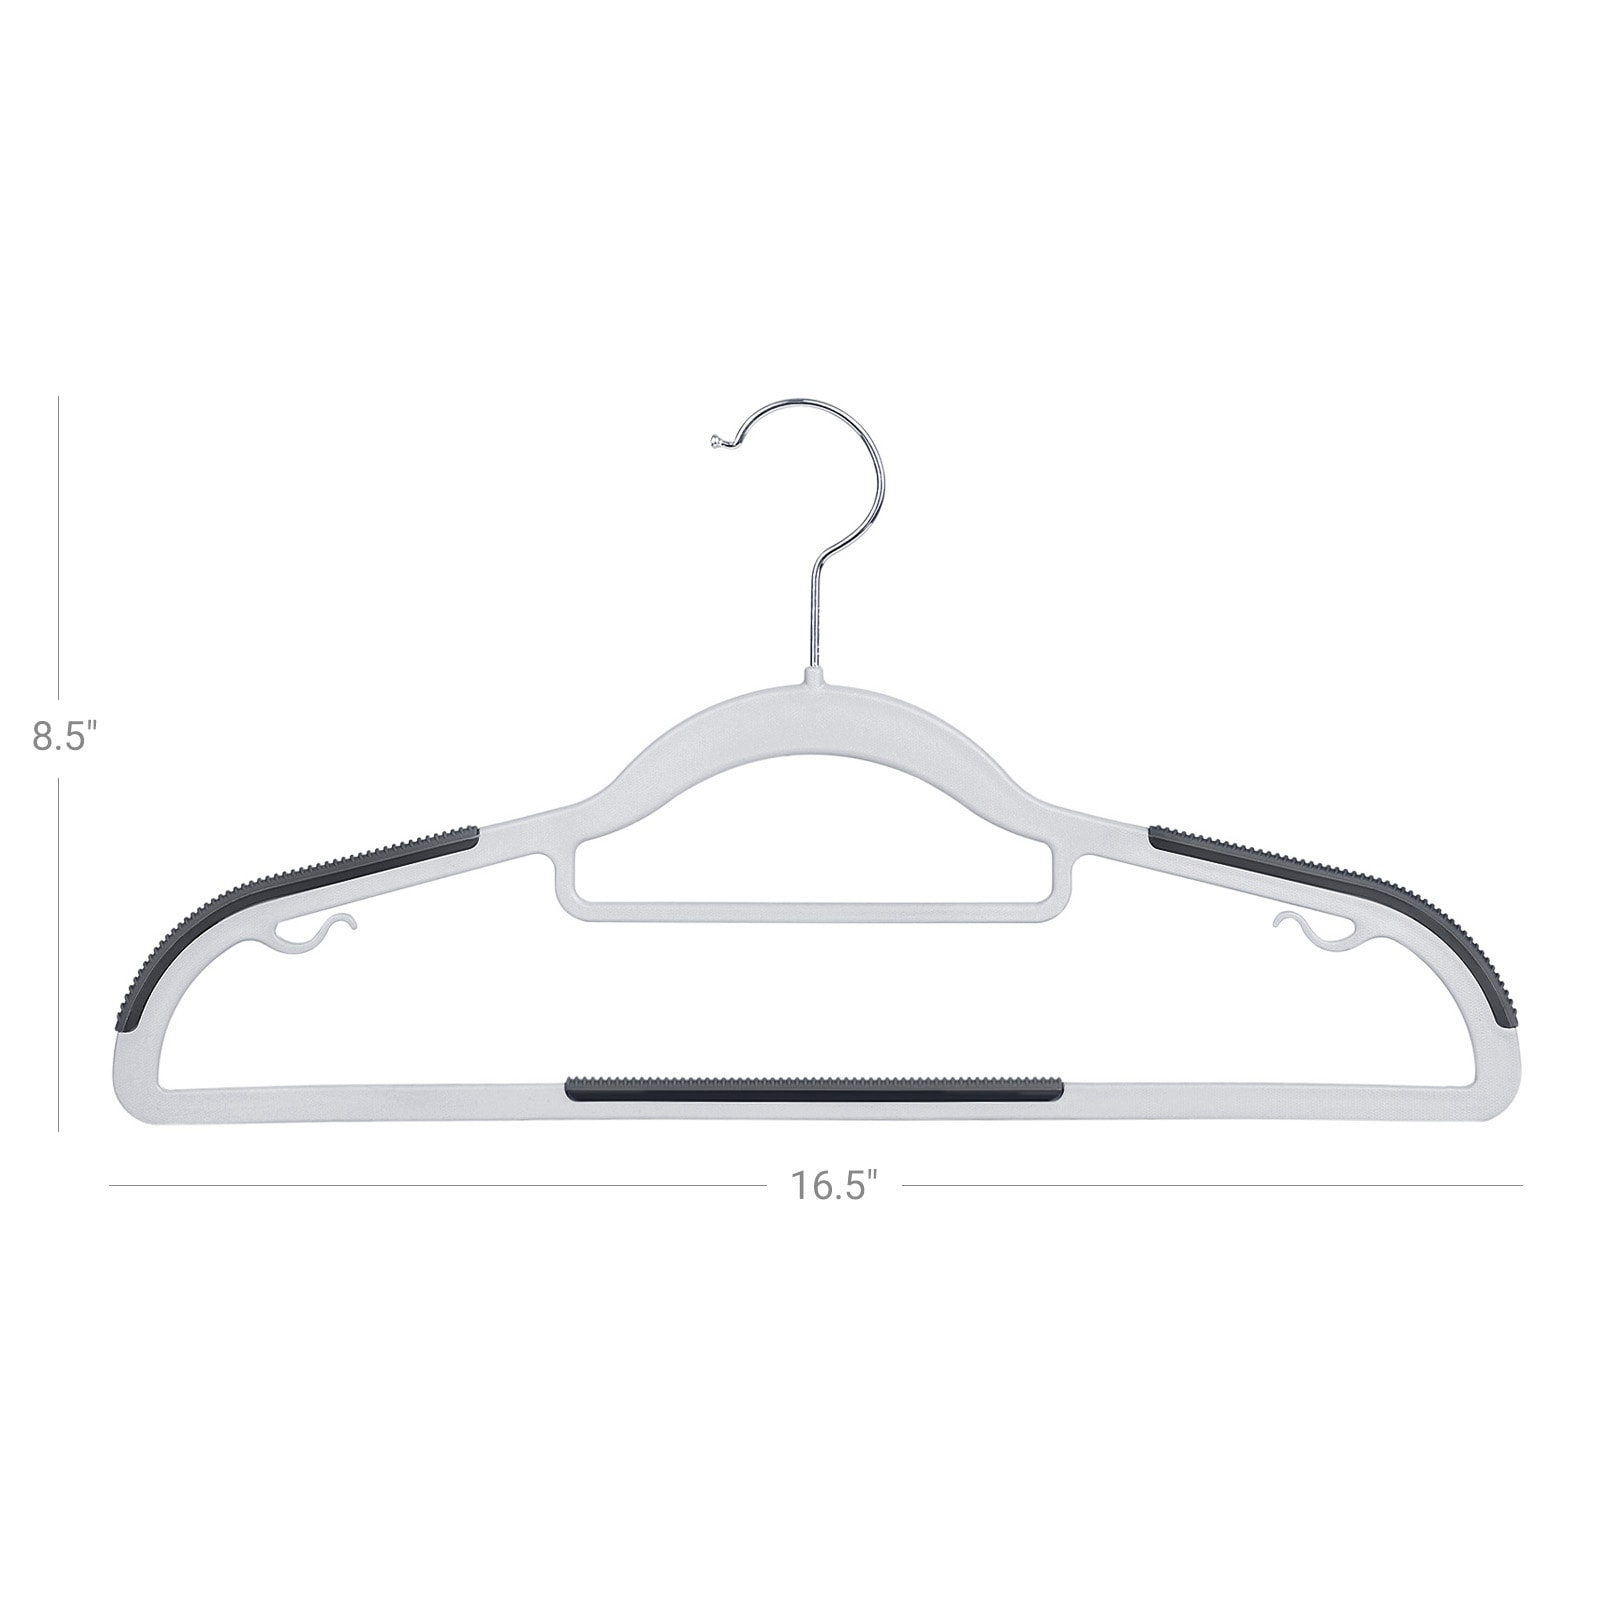 SONGMICS Pack of 50 Coat Hangers, Heavy-Duty Plastic Hangers, Non-Slip,  Space-Saving Clothes Hangers, 0.2 Inches Slim, 16.5 Inches Wide, 360°  Swivel